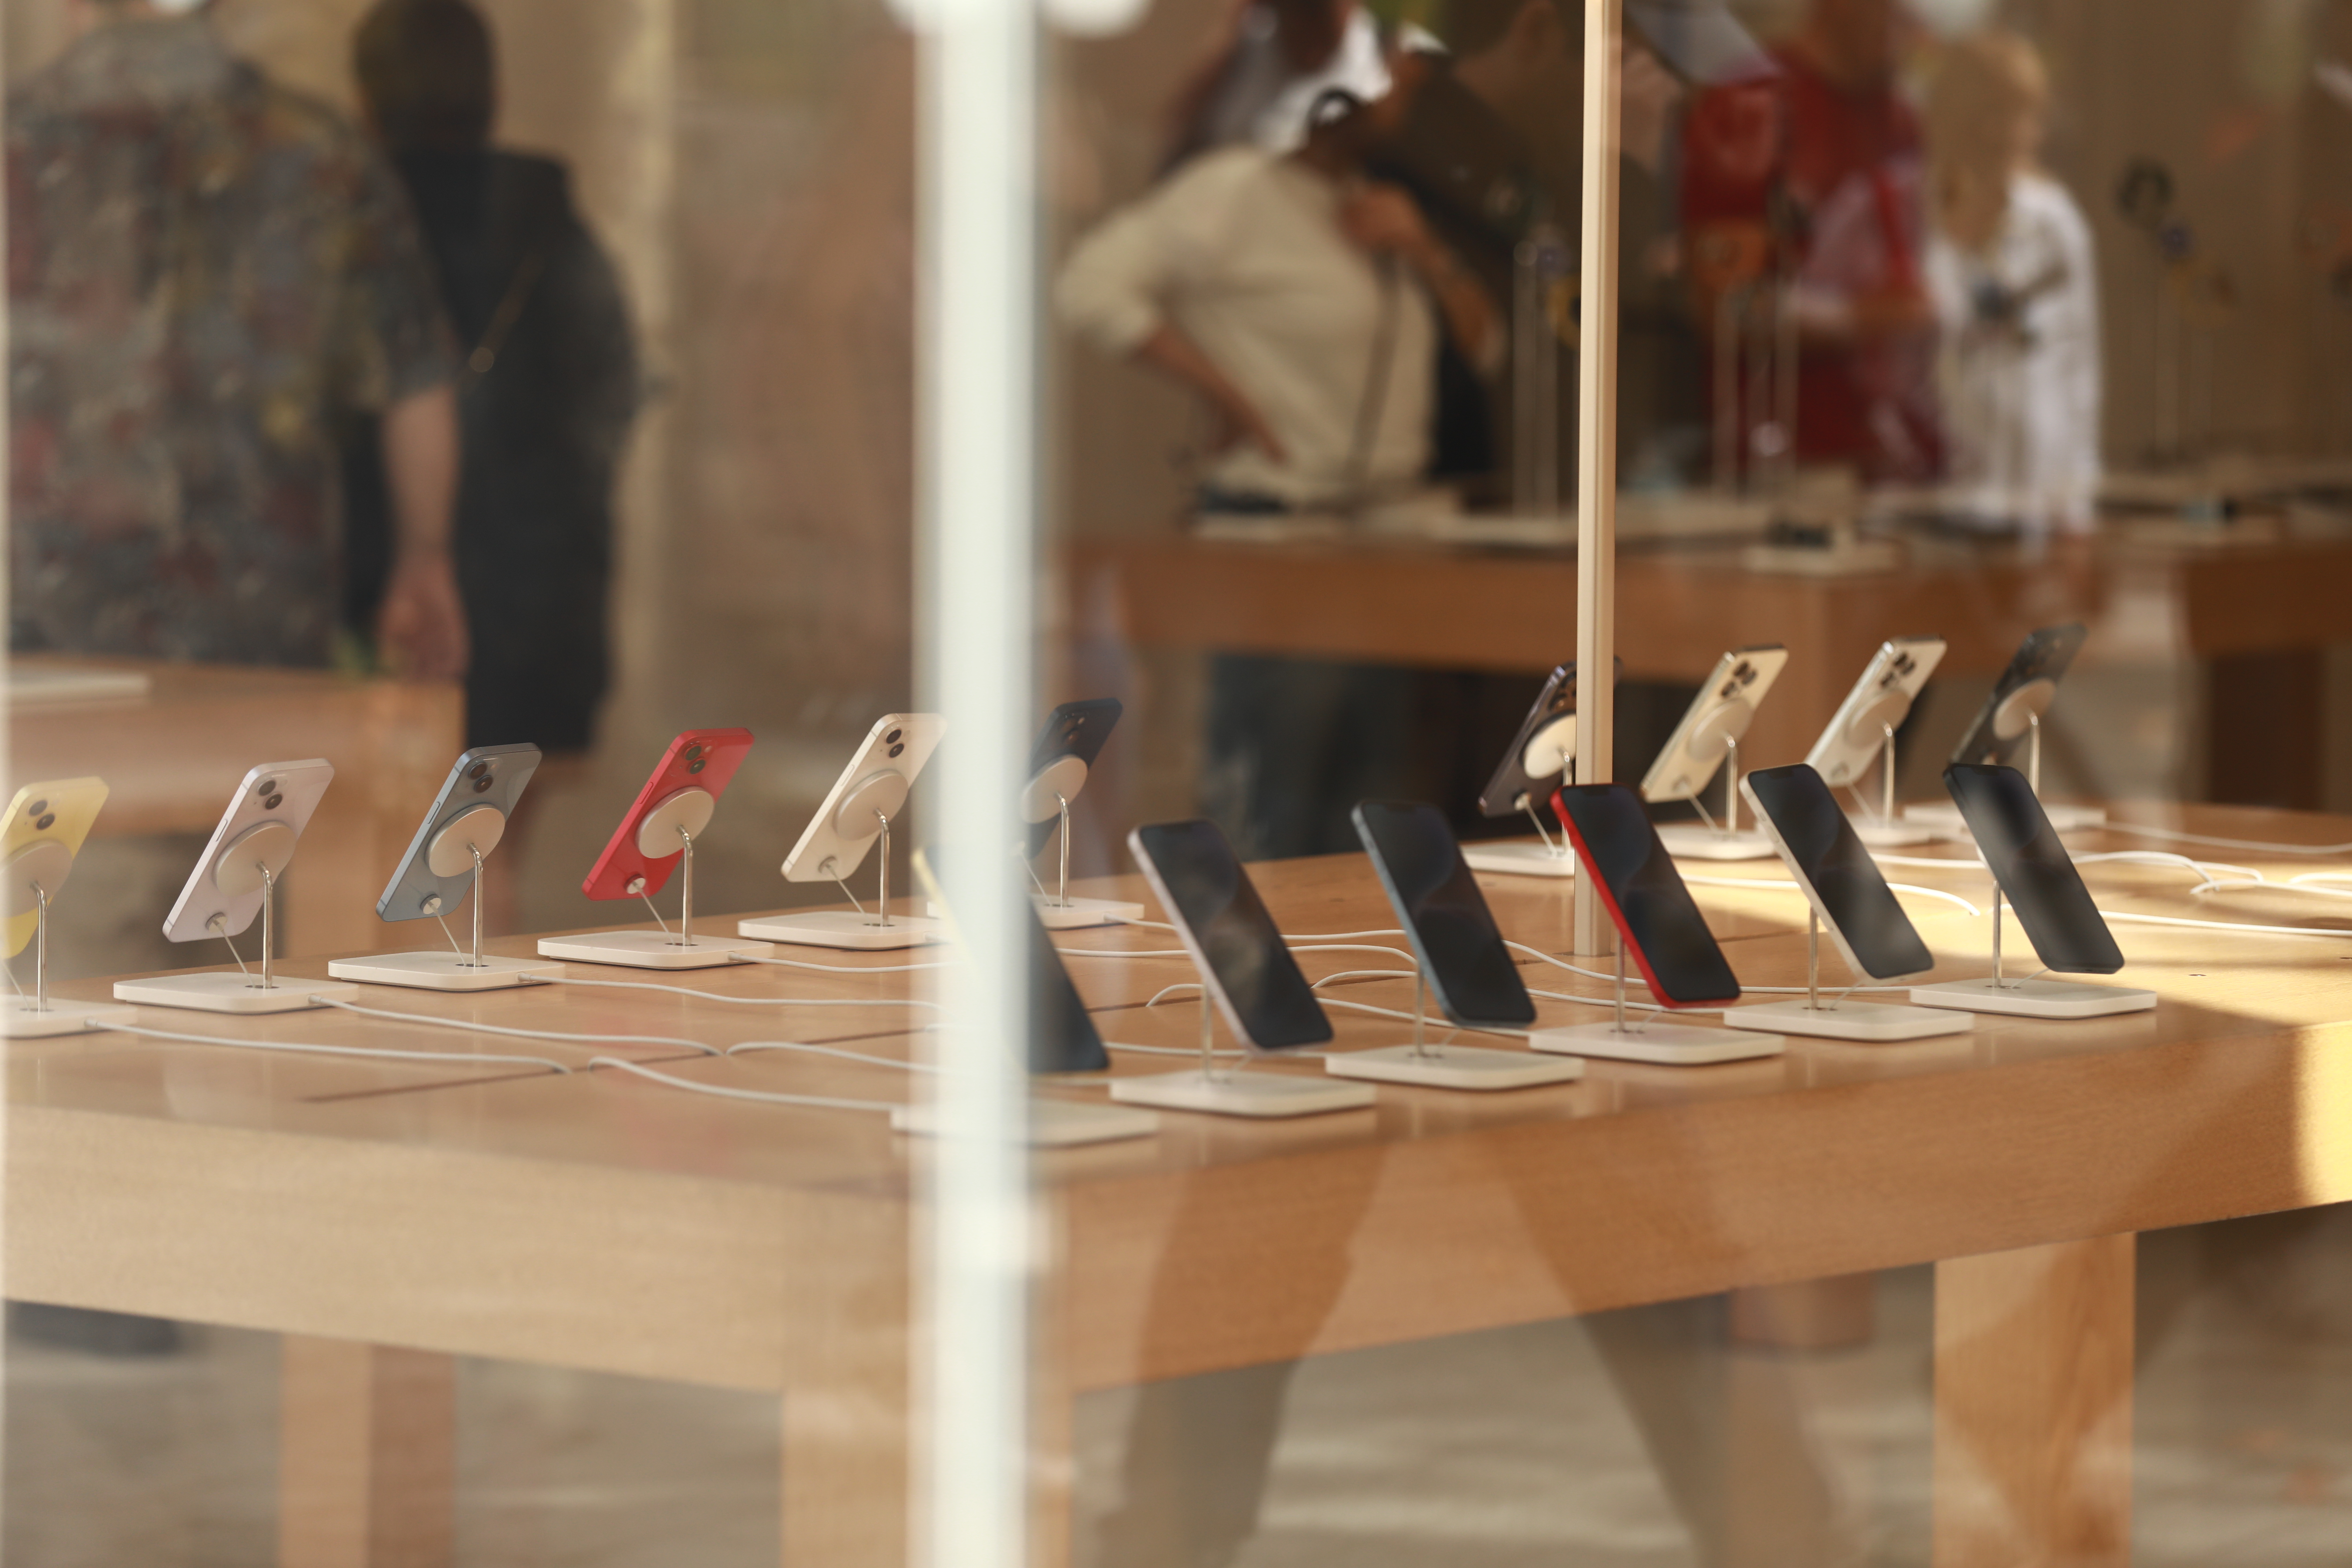 iPhone 12 sales halted in France because they emit too much radiation -  National